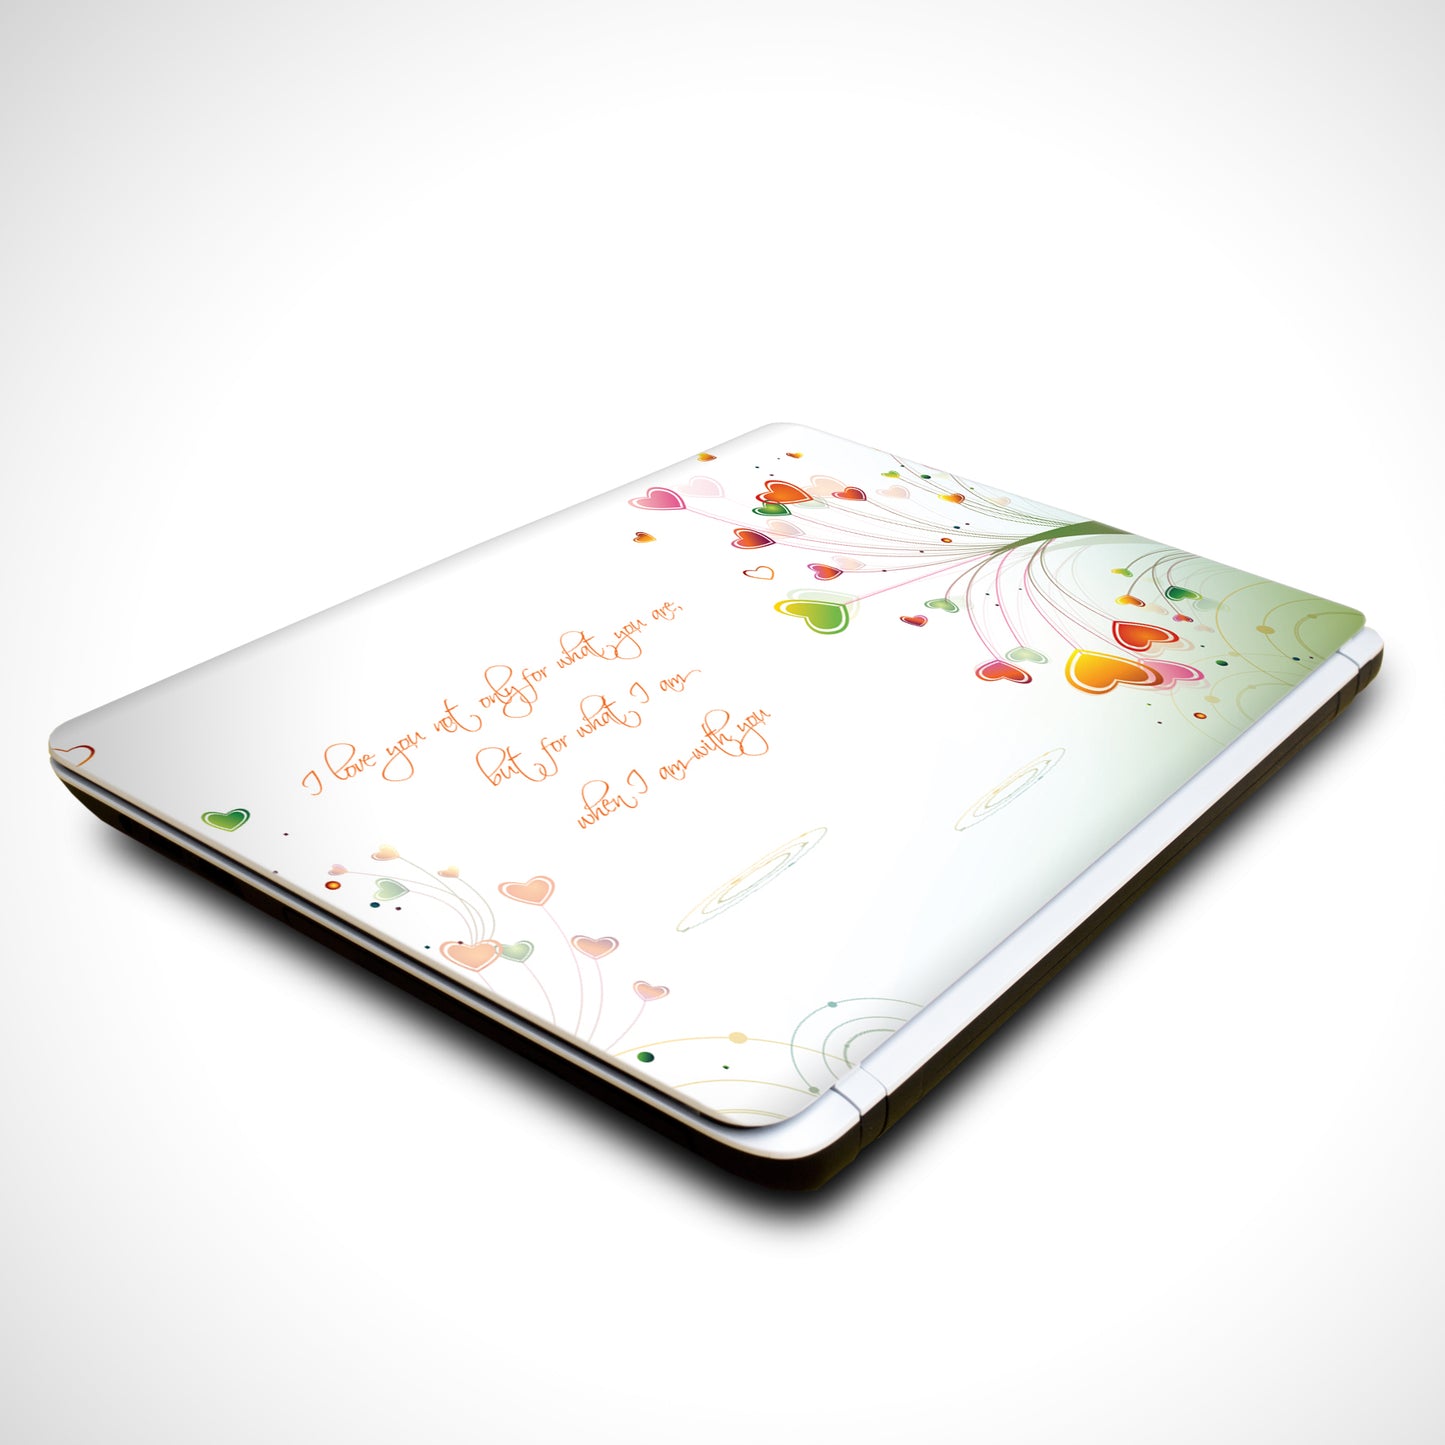 iberry's Vinyl Laptop Skin Sticker Collection for Dell, Hp, Toshiba, Acer, Asus & All Models (Upto 15.6 inches) -07